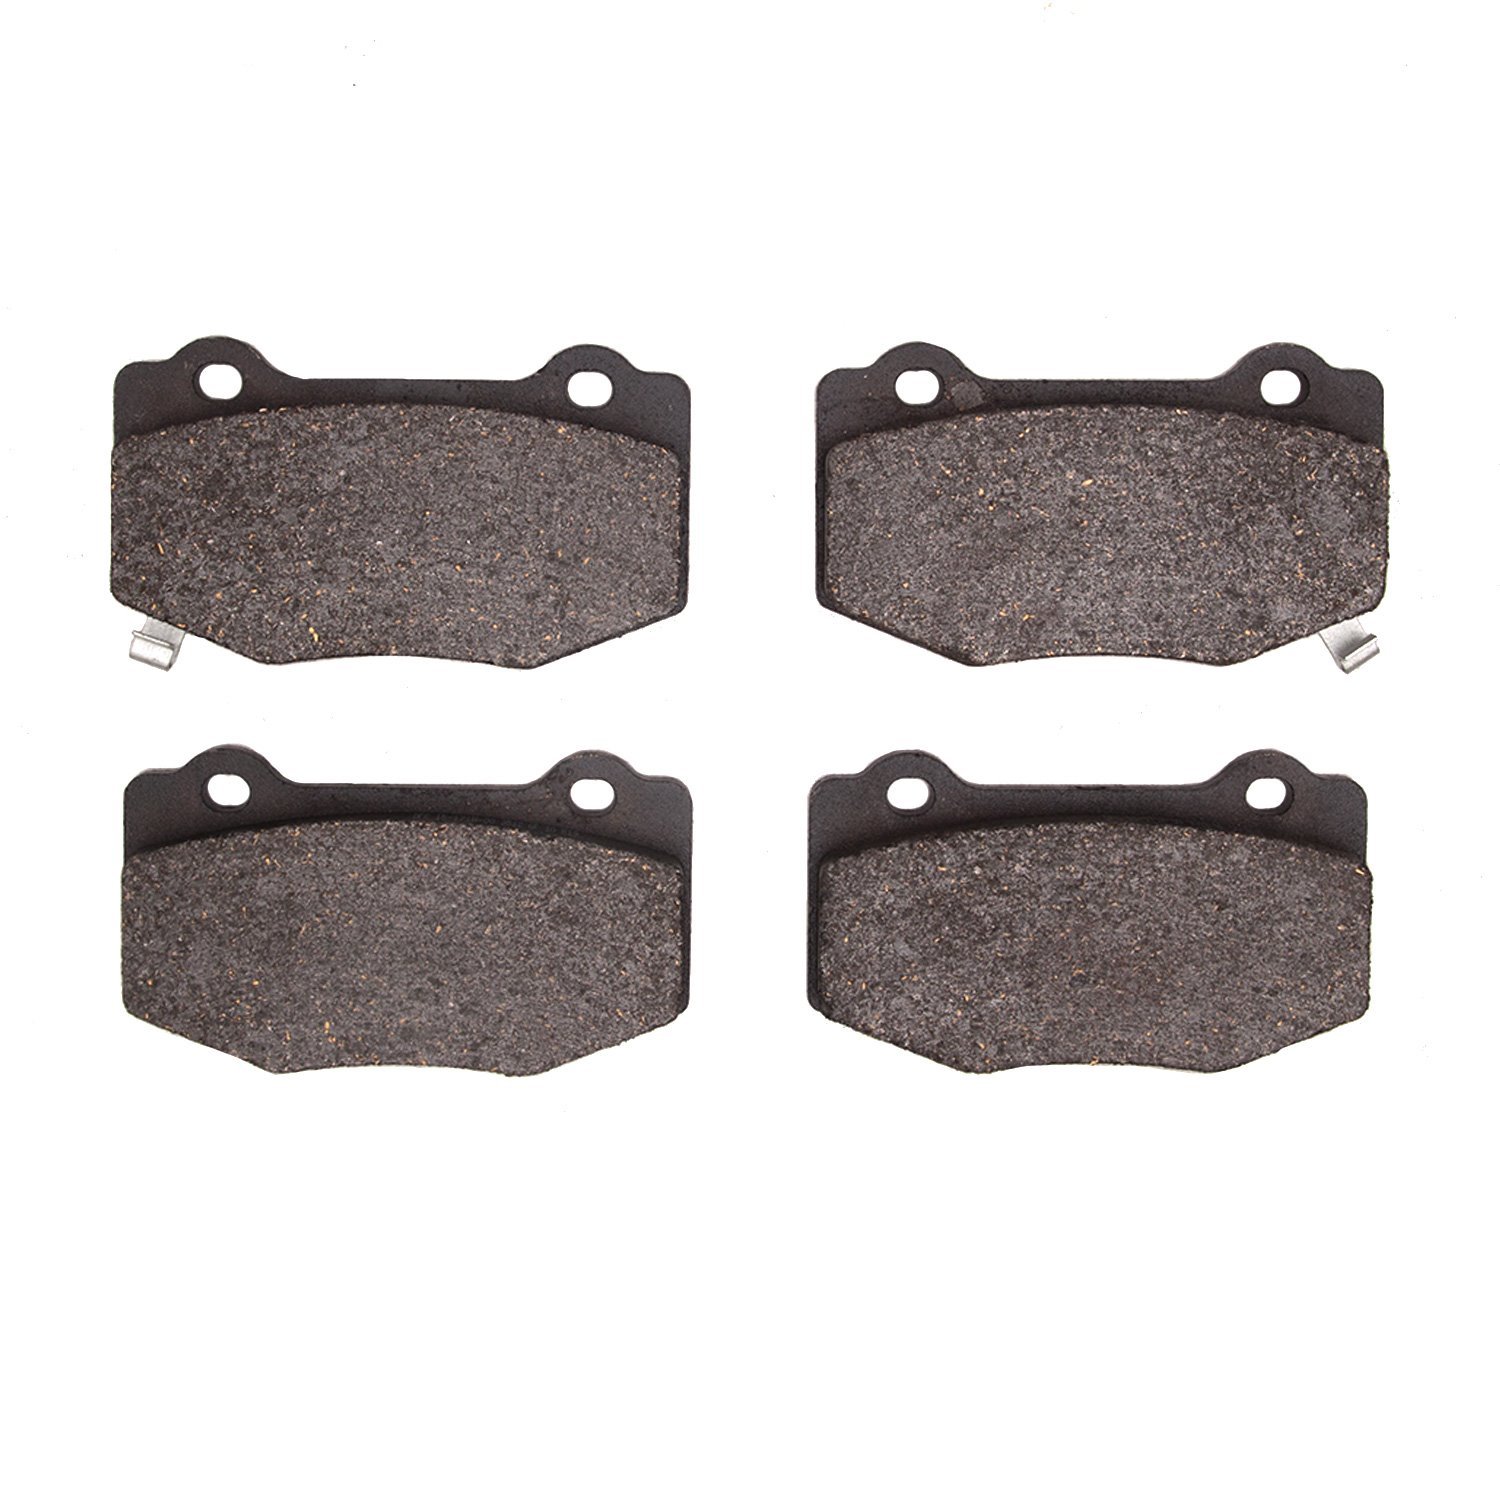 Euro Ceramic Brake Pads, Fits Select GM, Position: Rear